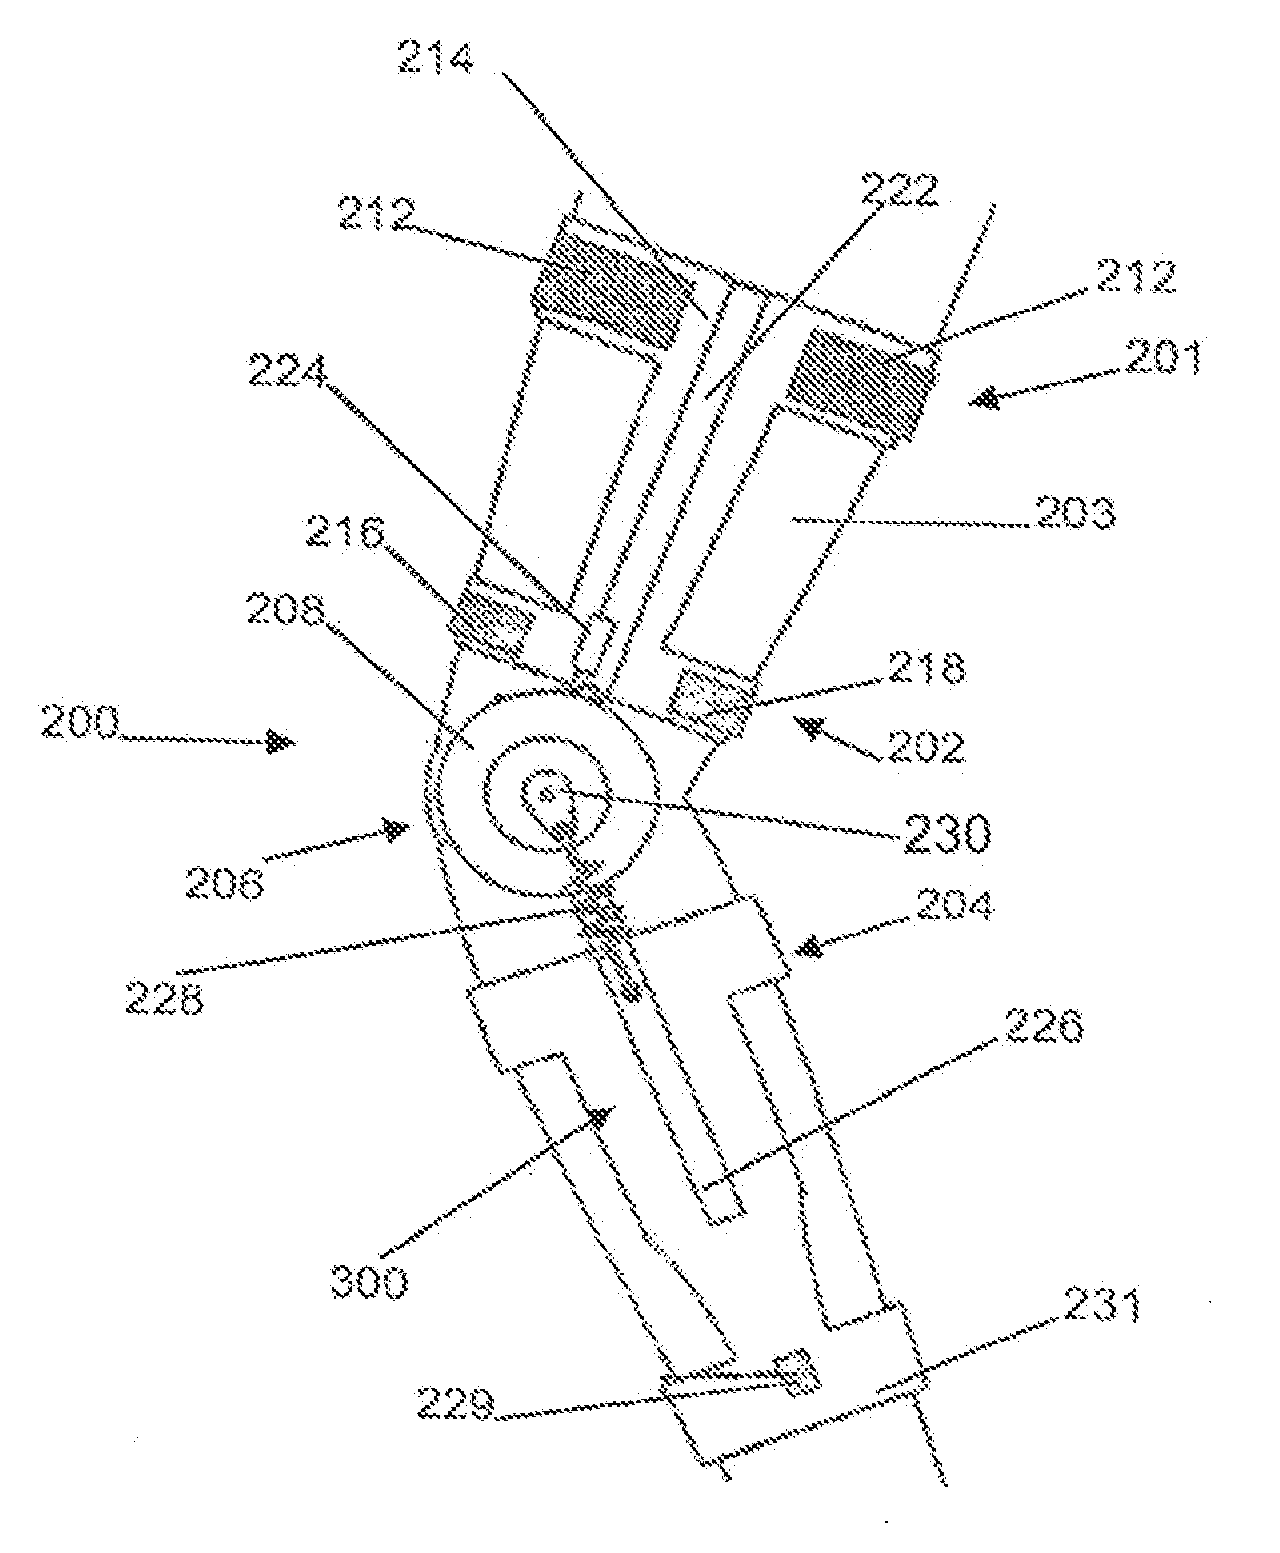 Actuated leg prostheses for amputees